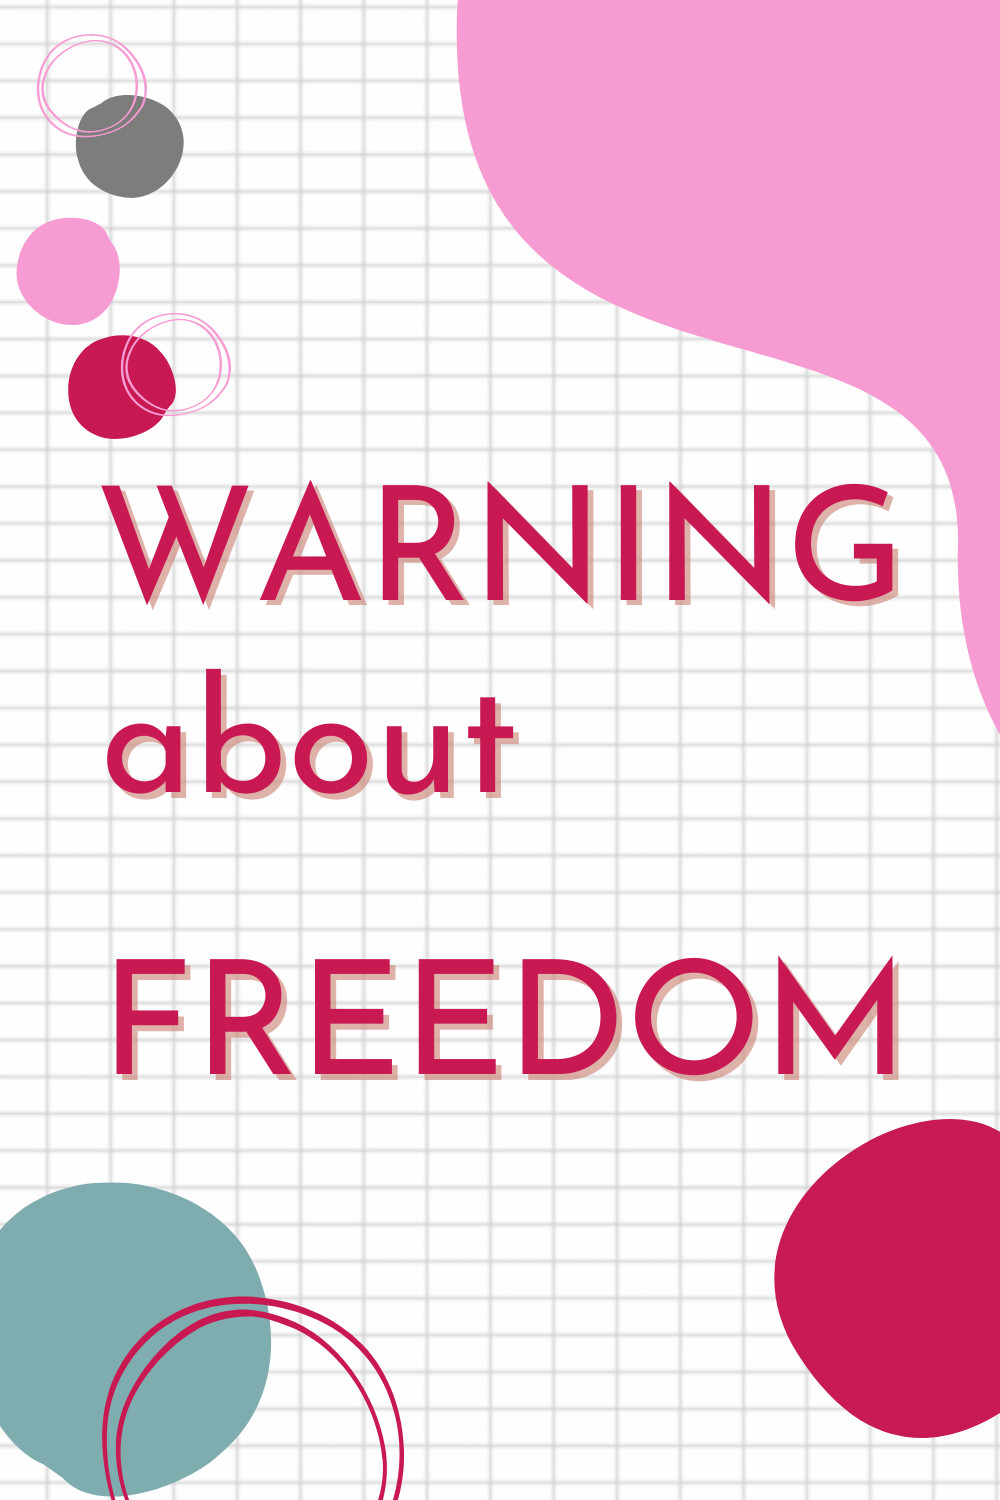 (--) A Warning about Freedom 